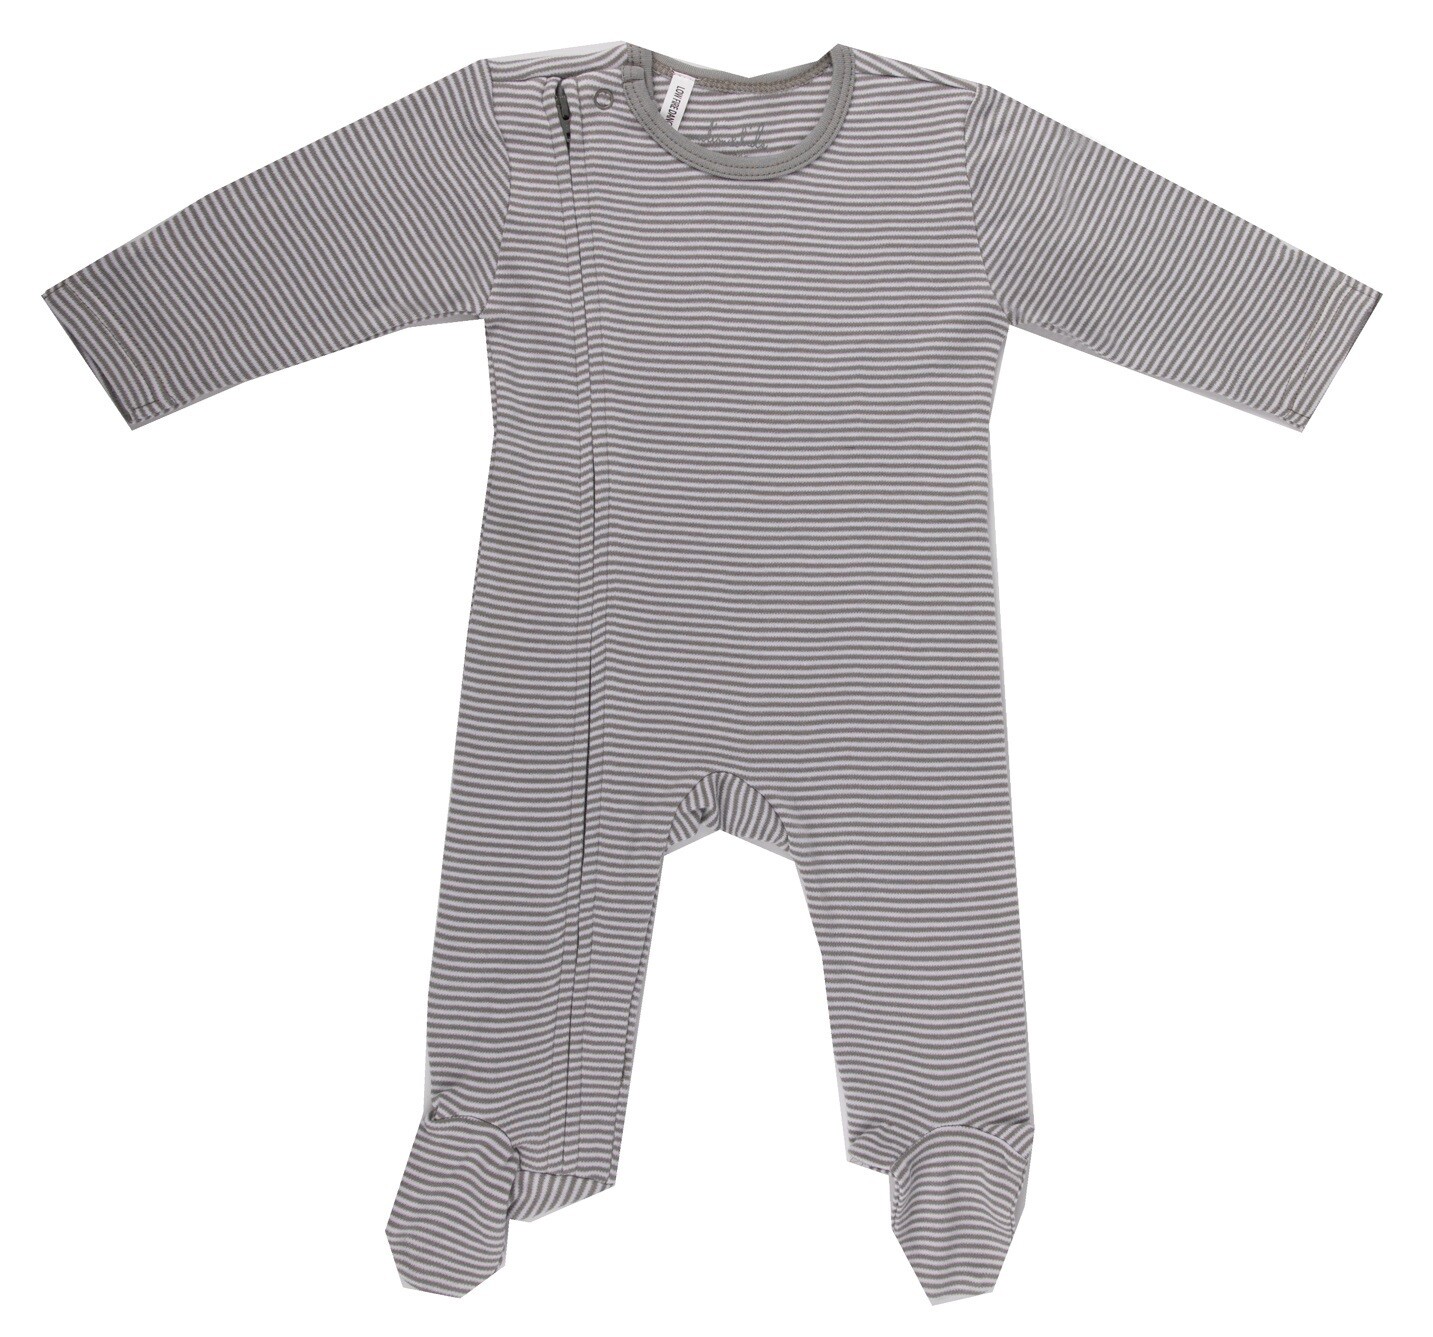 EMOTION & KIDS - Outfit with feet (0-3 Months) - Grey Marl Fine Stripe